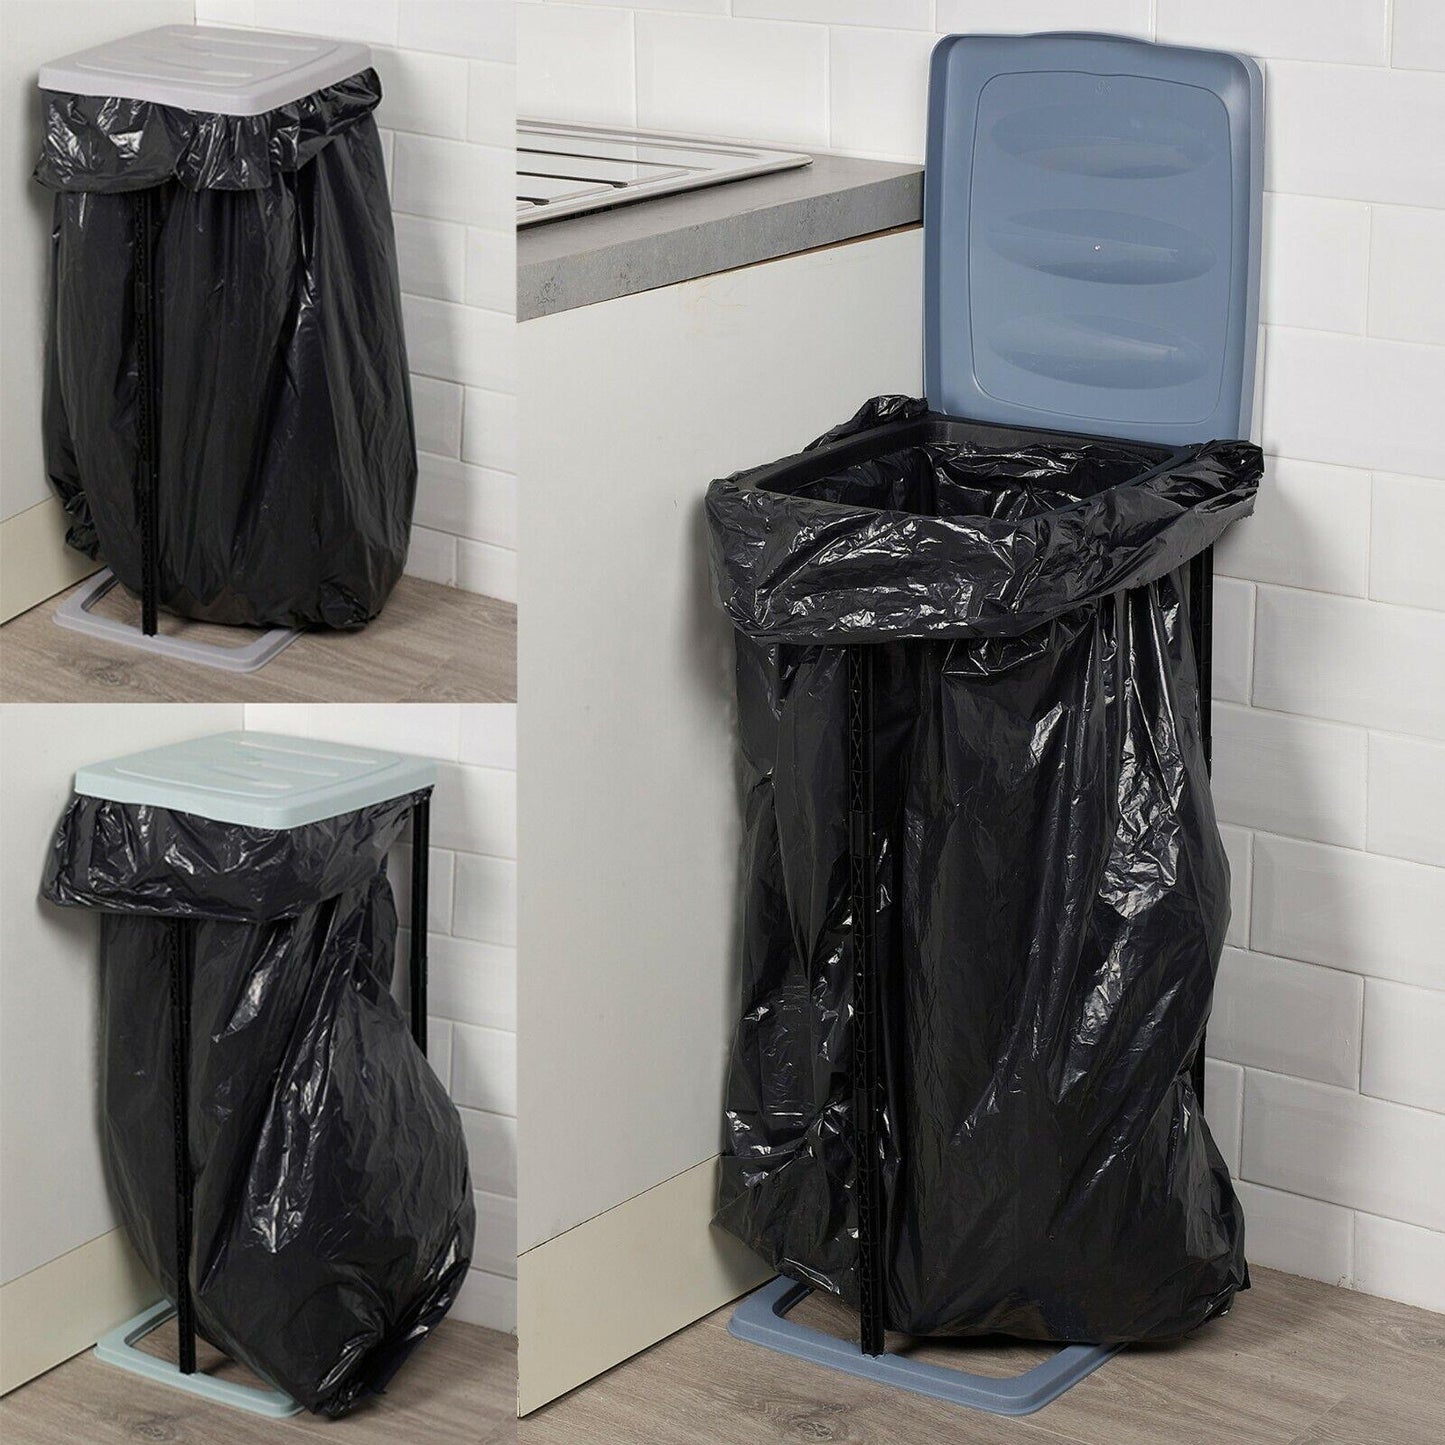 Rubbish Bag Stand by Geezy - UKBuyZone